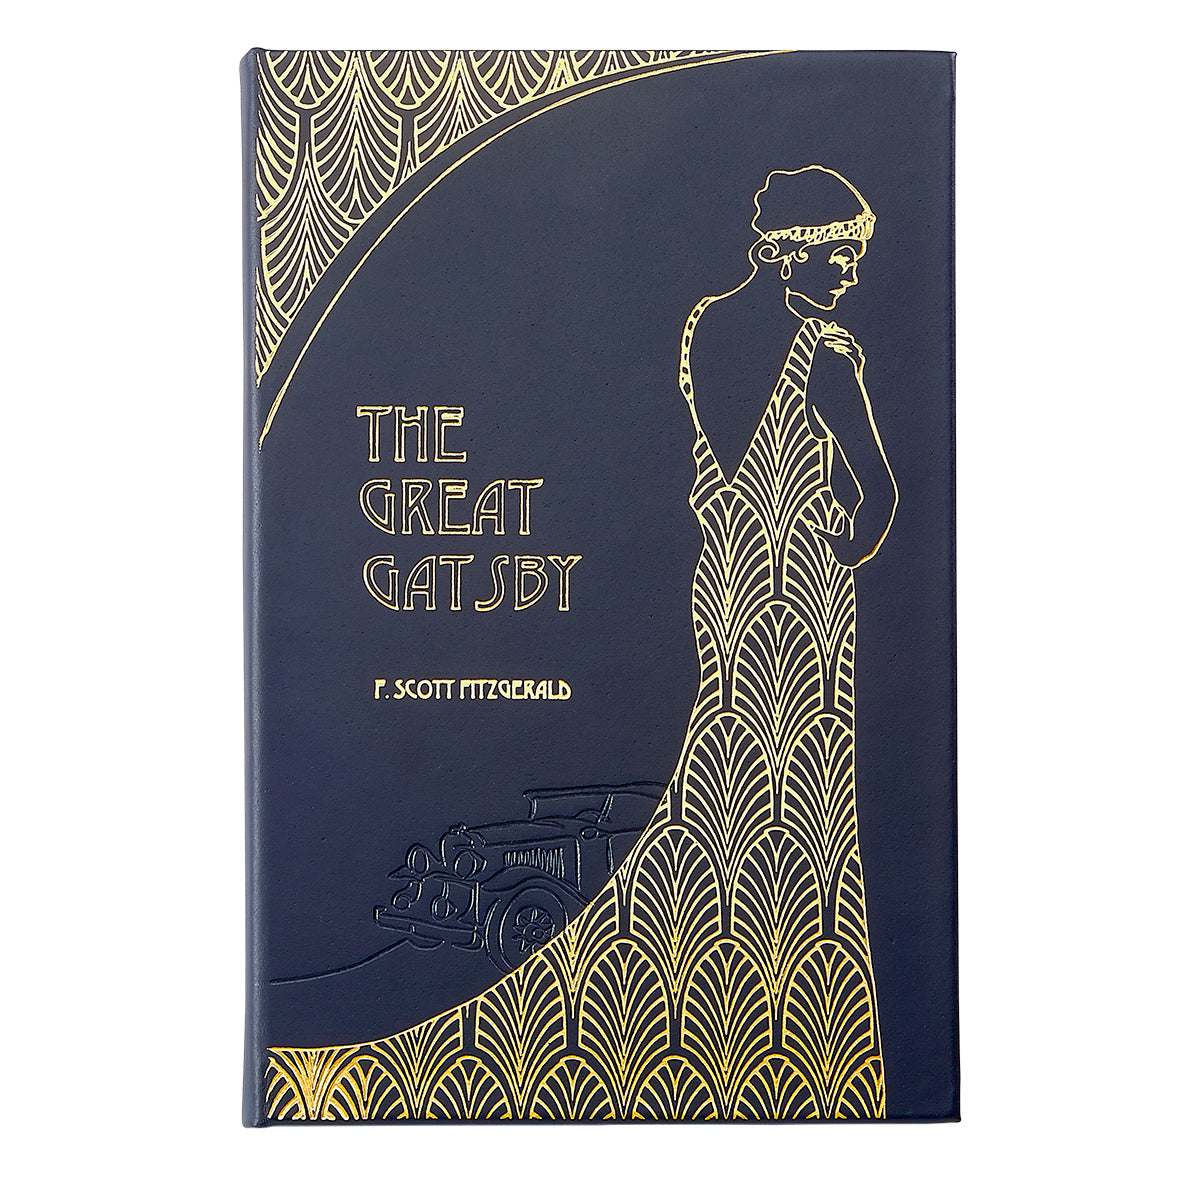 Great　Navy　Leather　Graphic　The　–　Bonded　Gatsby　Image